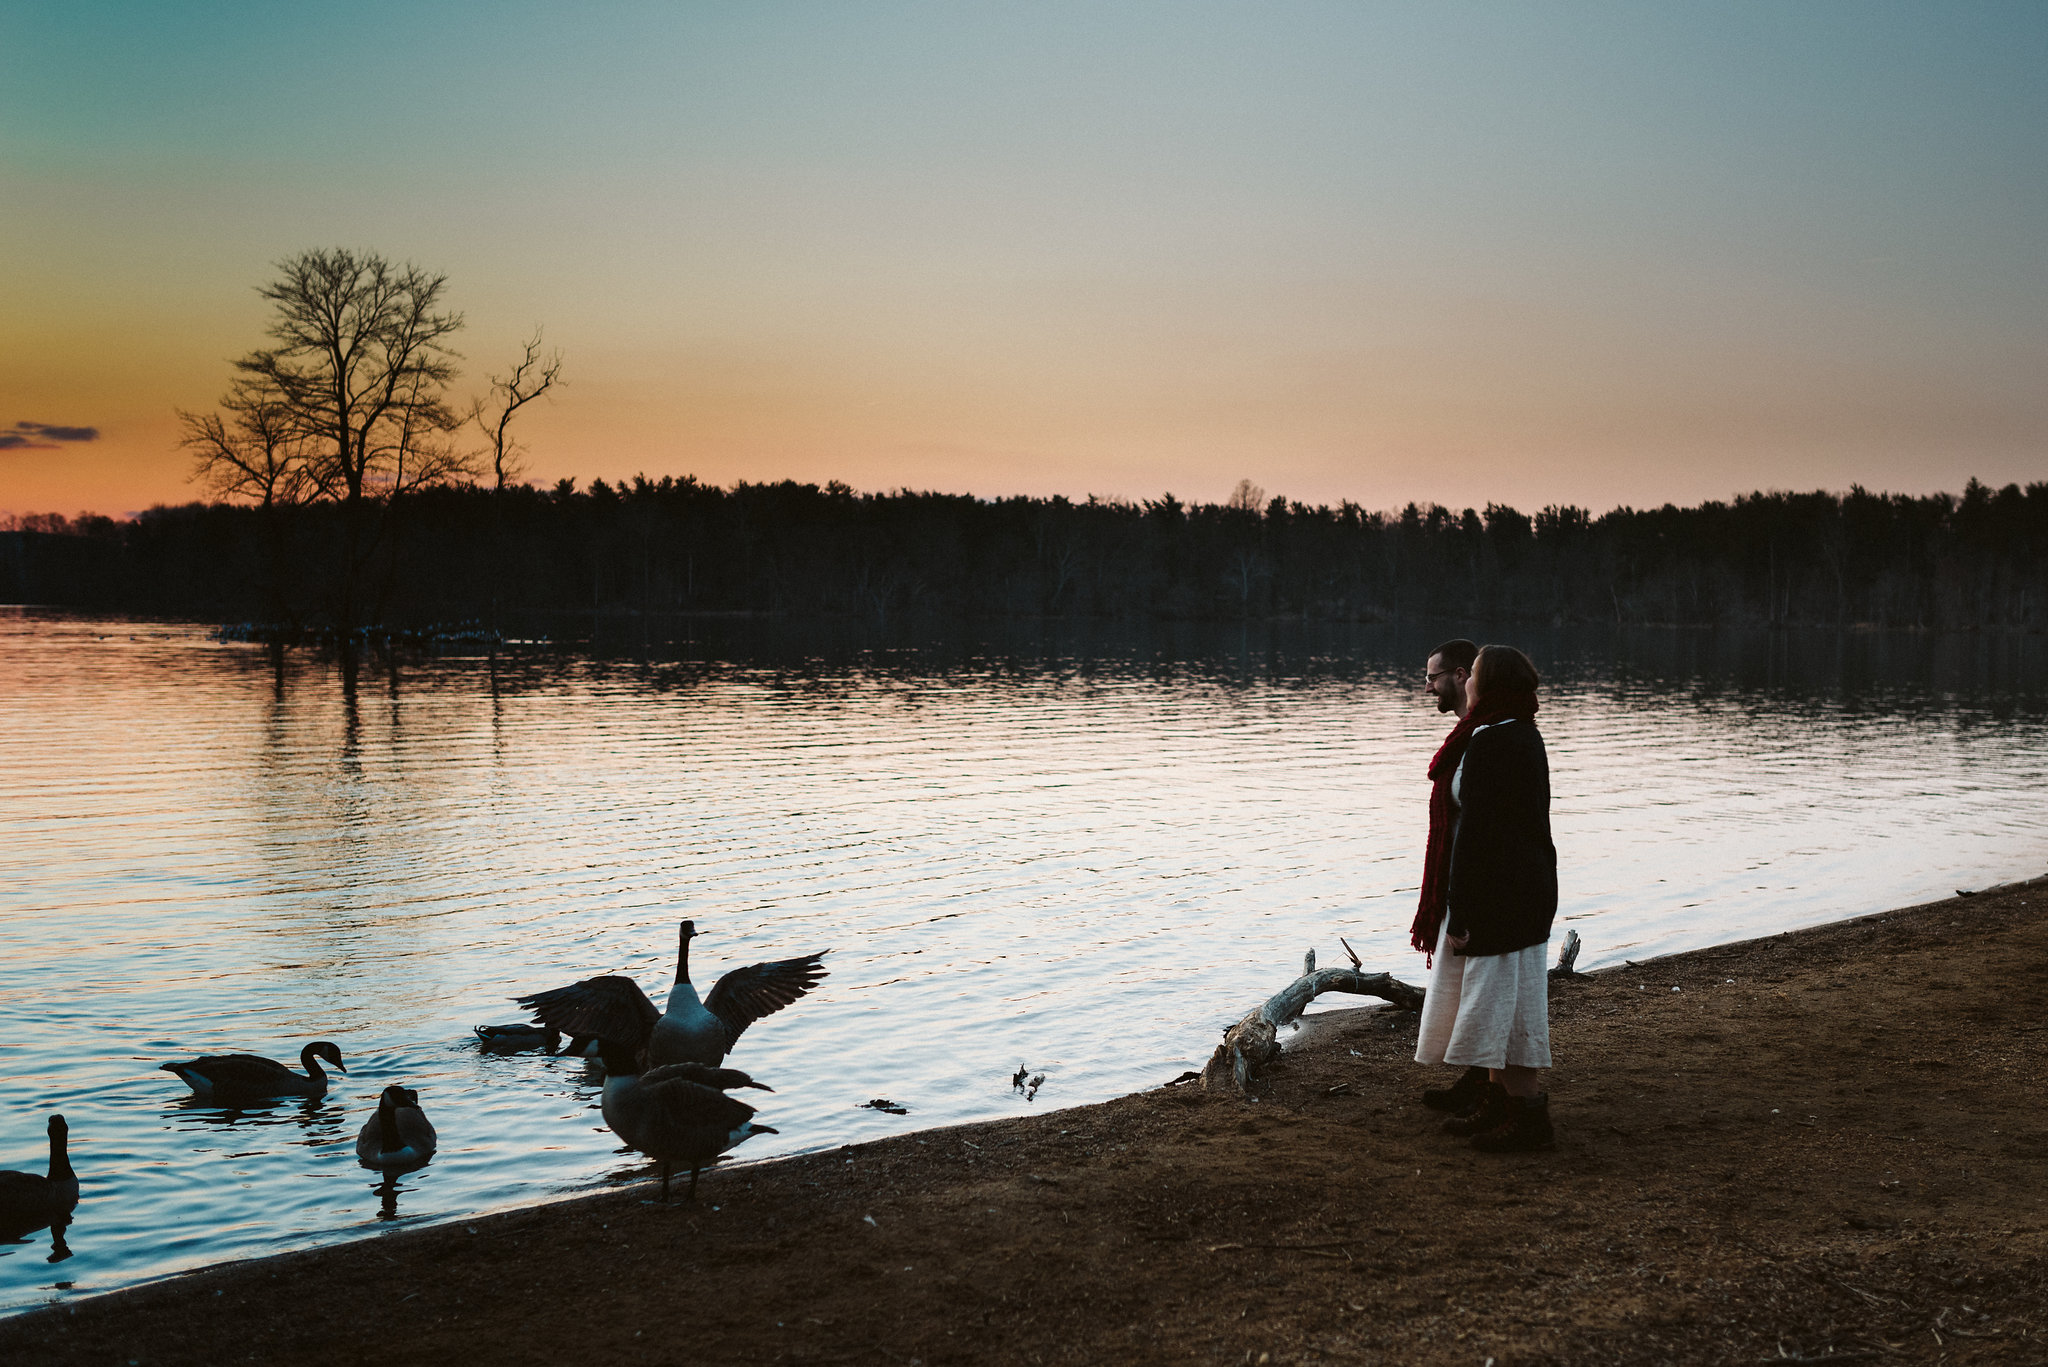  Baltimore County, Loch Raven Reservoir, Maryland Wedding Photographer, Winter, Engagement Photos, Nature, Romantic, Classic, Bride and Groom Standing Along Water During Sunset, Soft Colors, Wildlife 